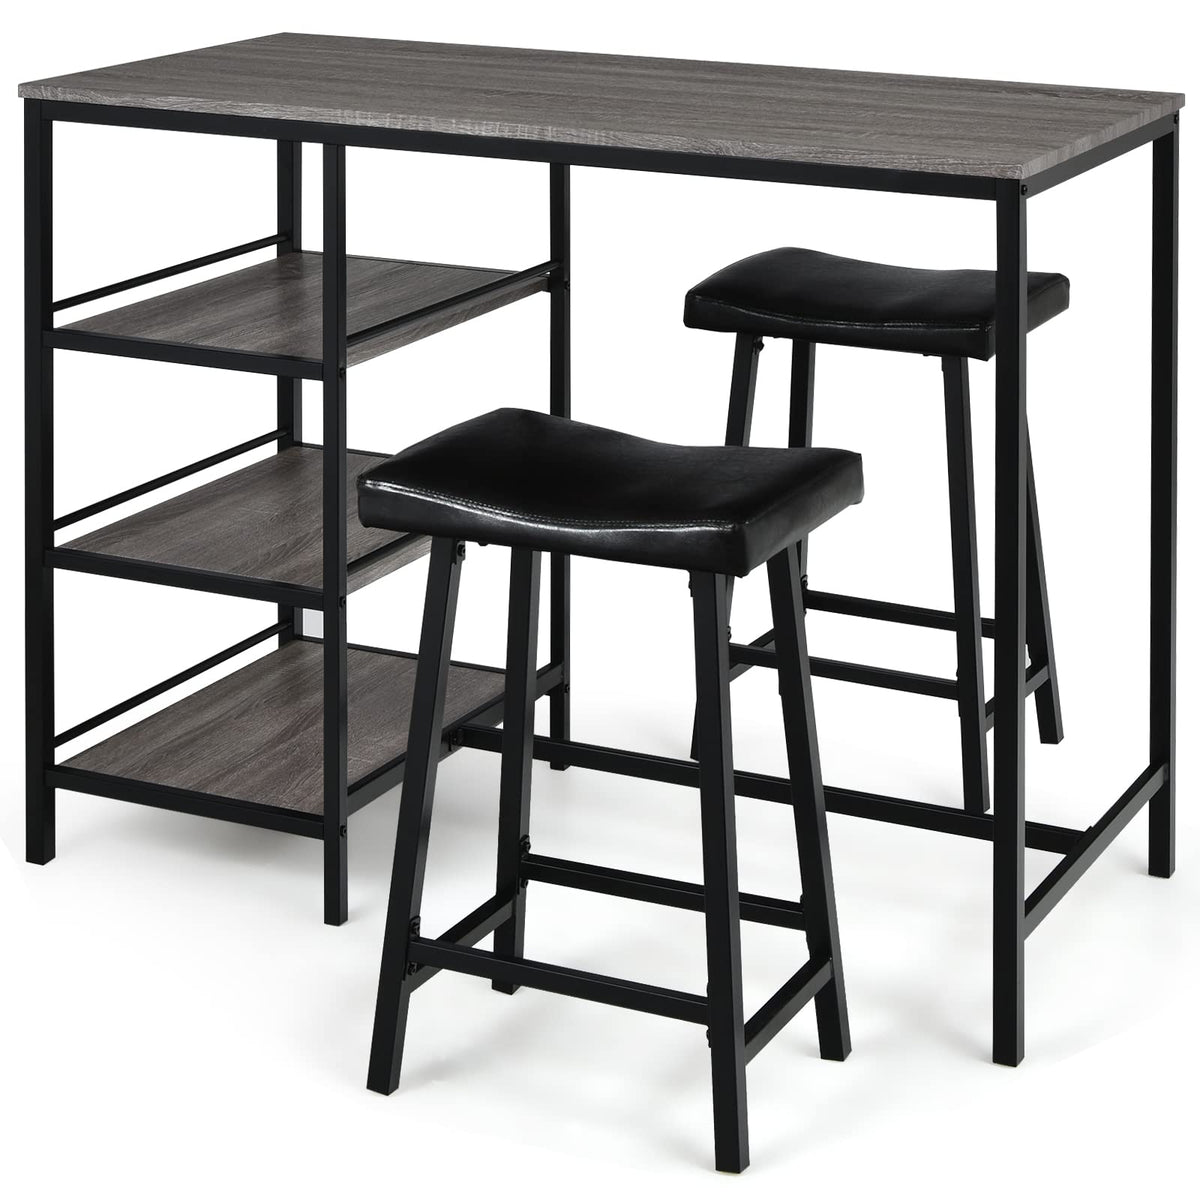 Giantex 3-Piece Dining Table Set, Counter Height Table Set w/2 Bar Stools, Modern Industrial Bar Table Set